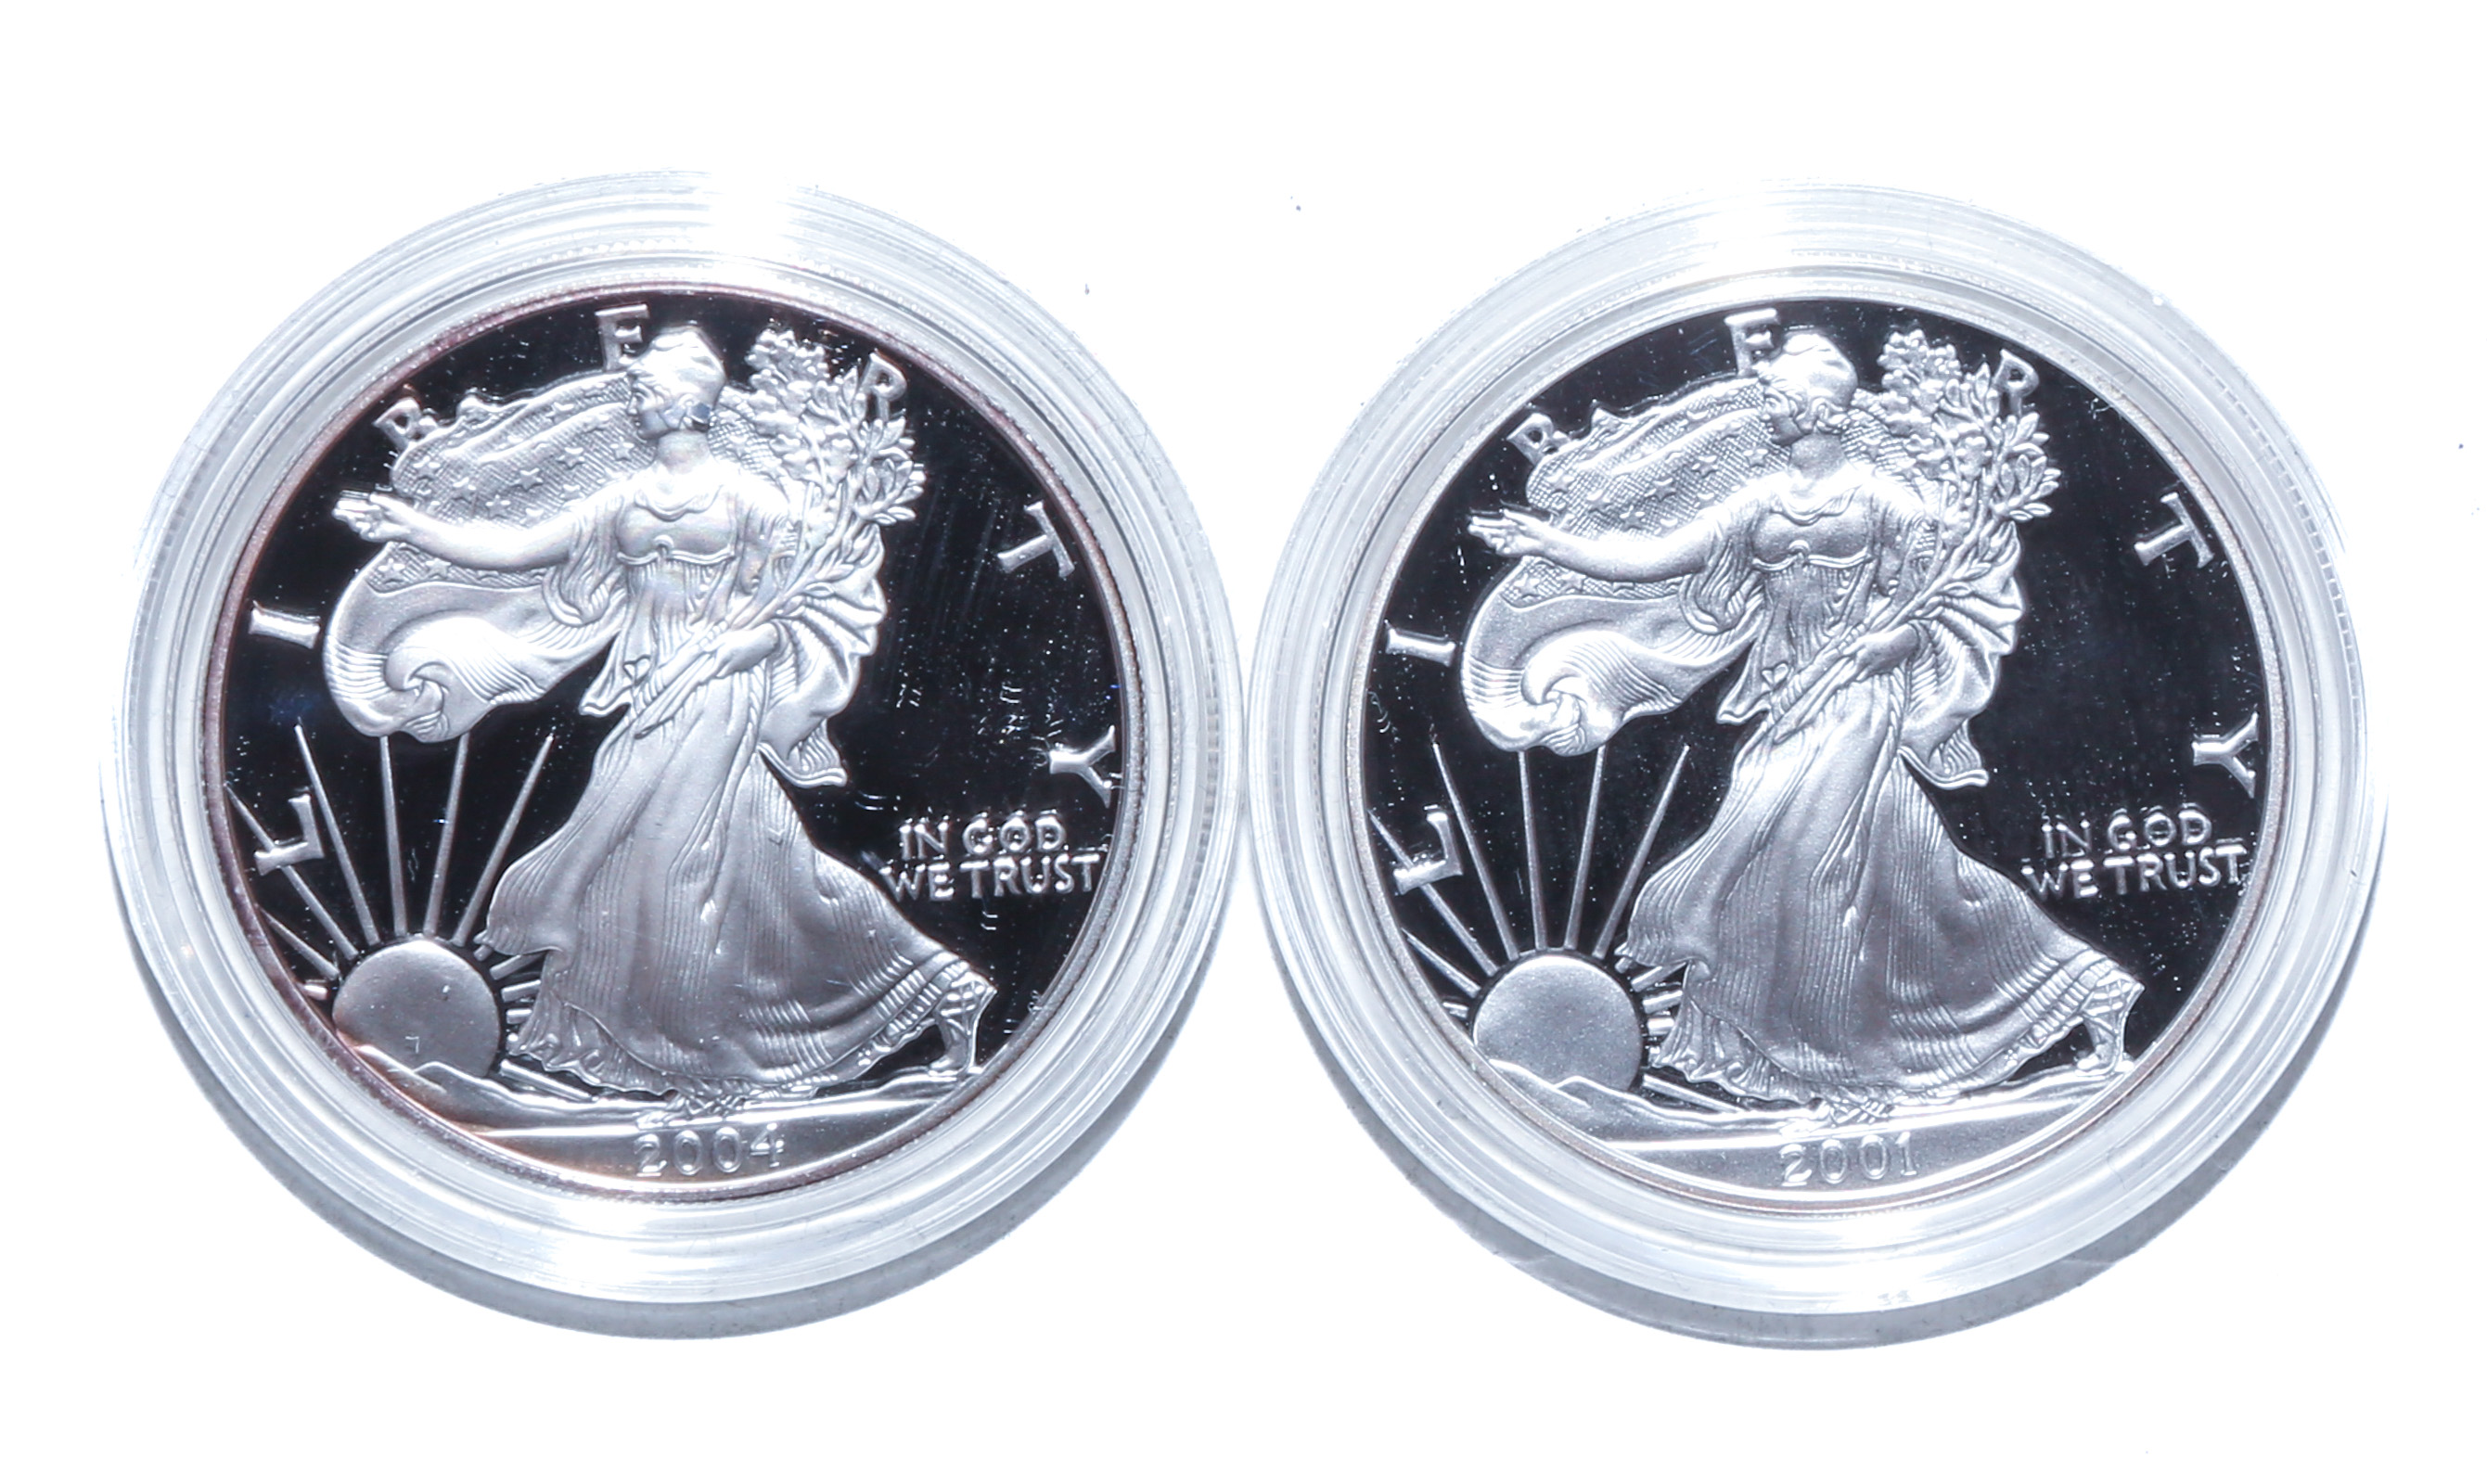 2001 2004 PROOF SILVER EAGLES 308a76